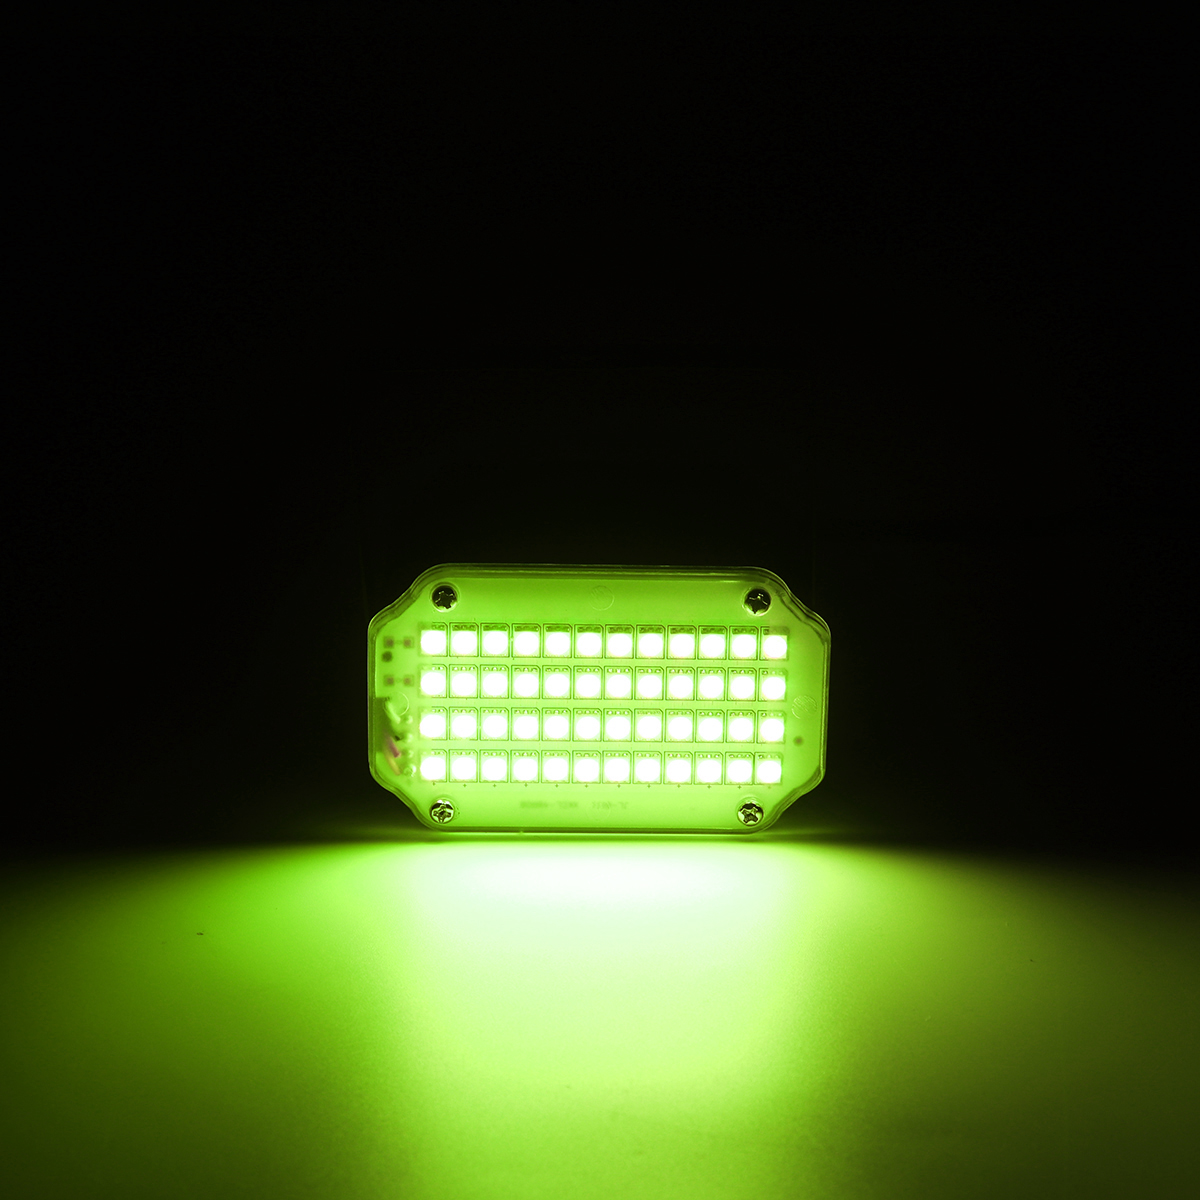 Find Stage Lighting 48 Pcs SMD LED Strobe Light Mini KTV Private Room Burst Flashing Light Jumping Di Flashing Bar Light for Sale on Gipsybee.com with cryptocurrencies